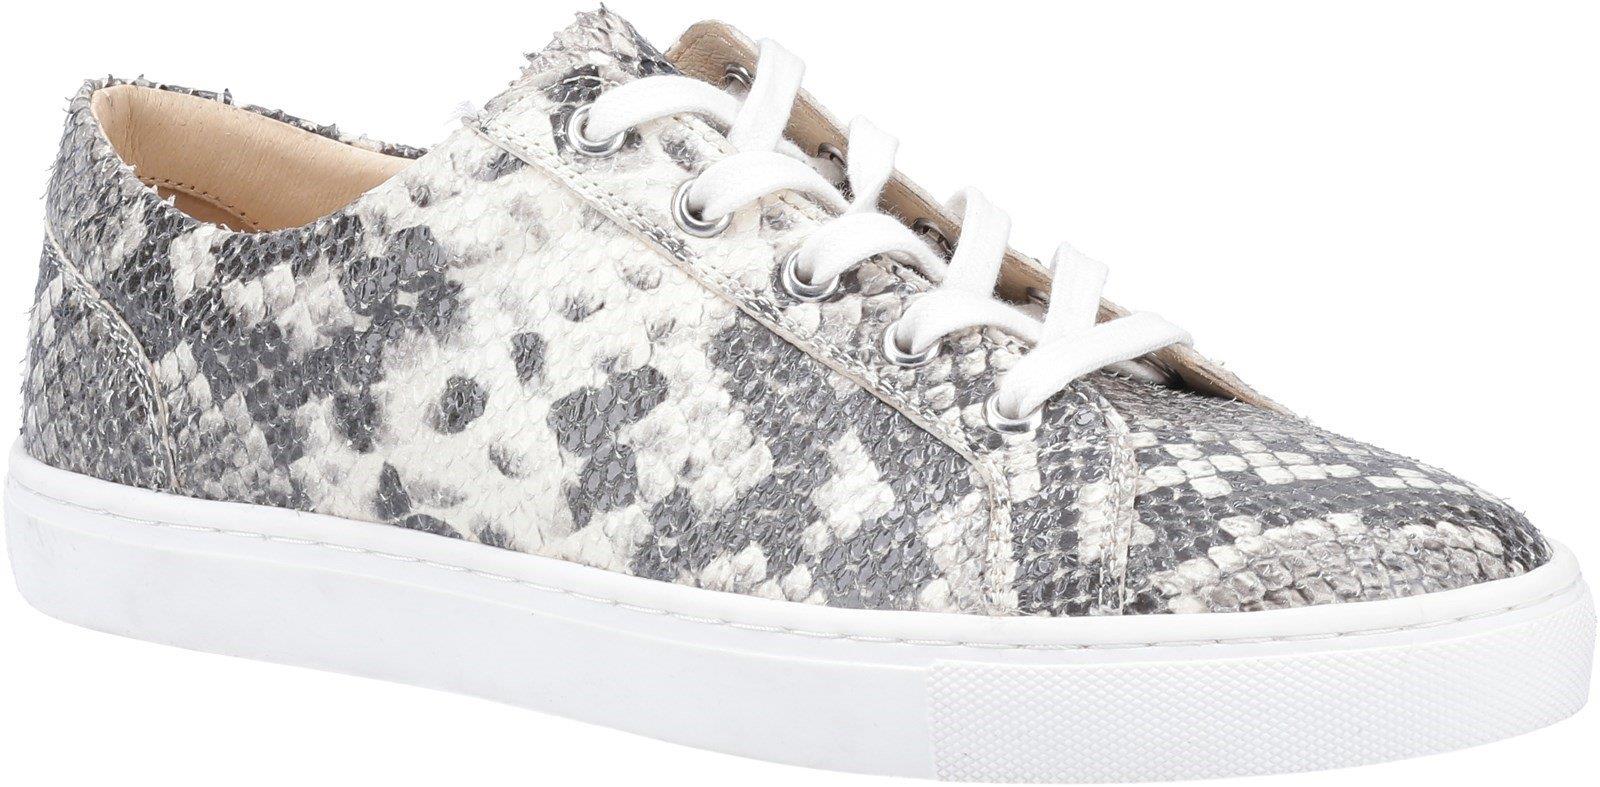 Hush Puppies Tessa snake python print ladies lace up sneakers trainers shoes